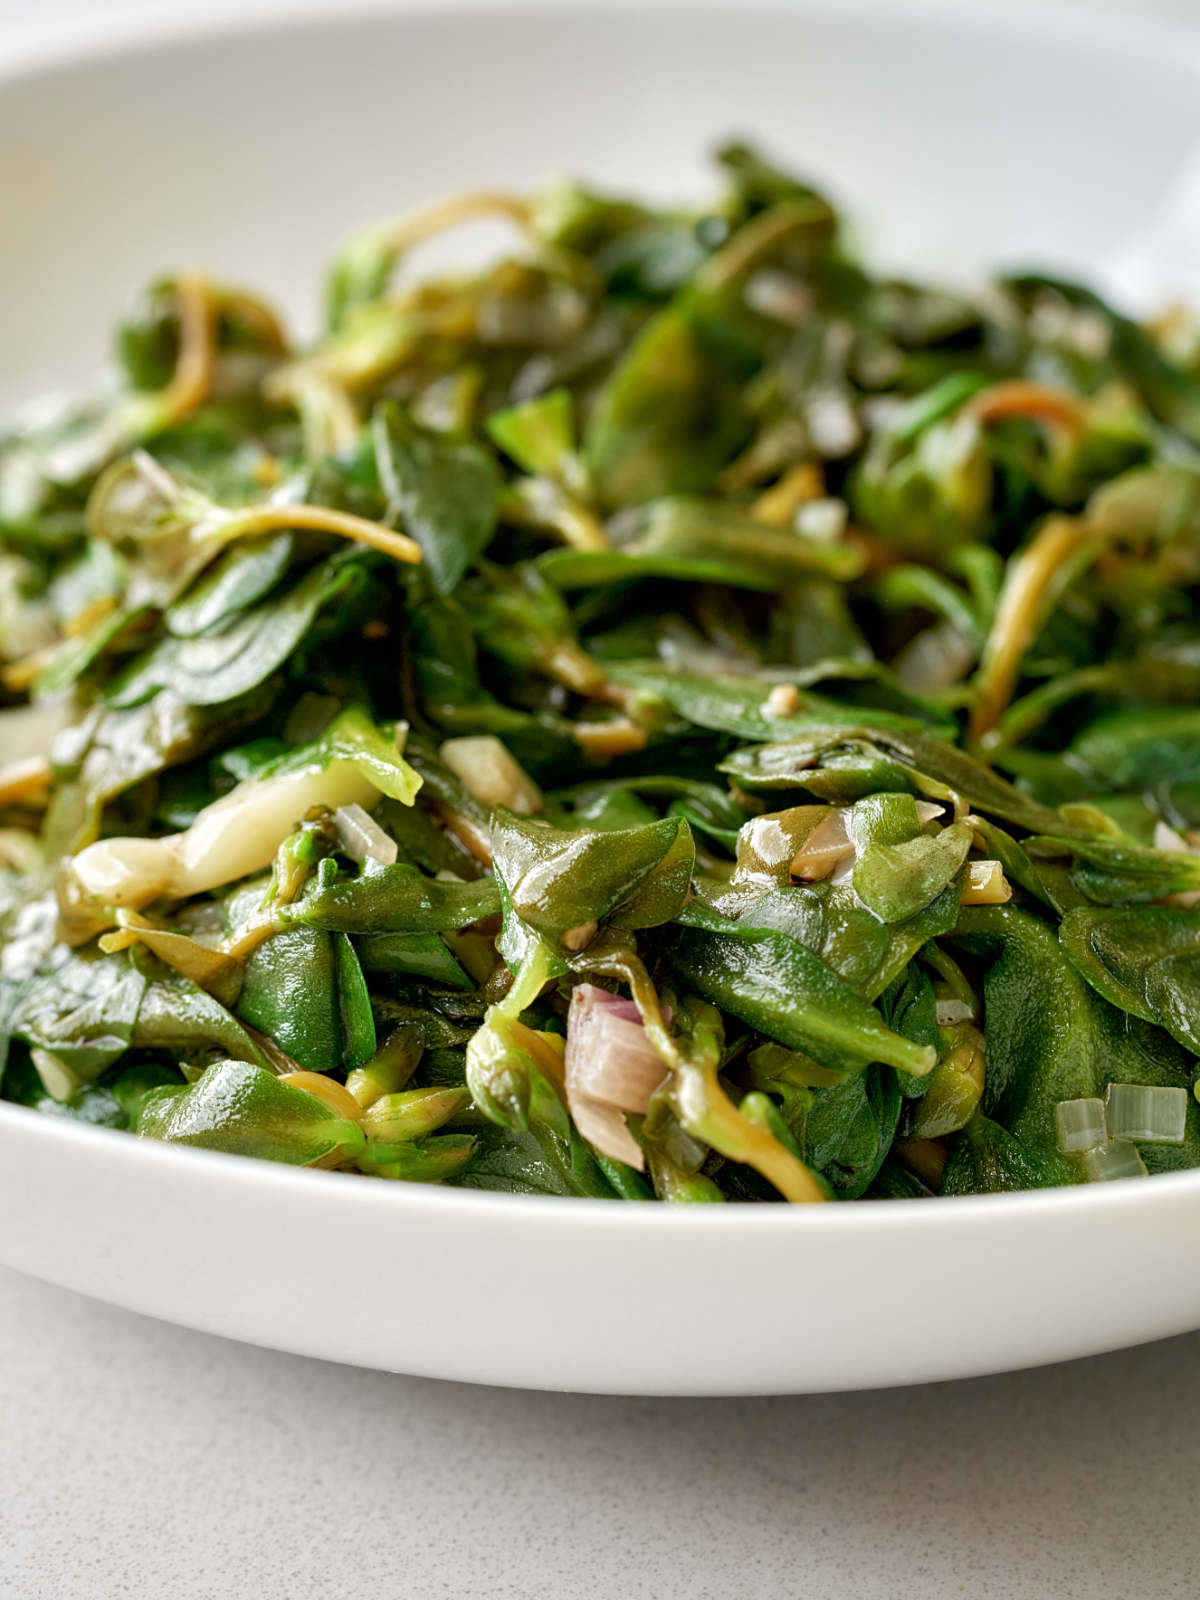 Sauteed greens in a white serving dish.